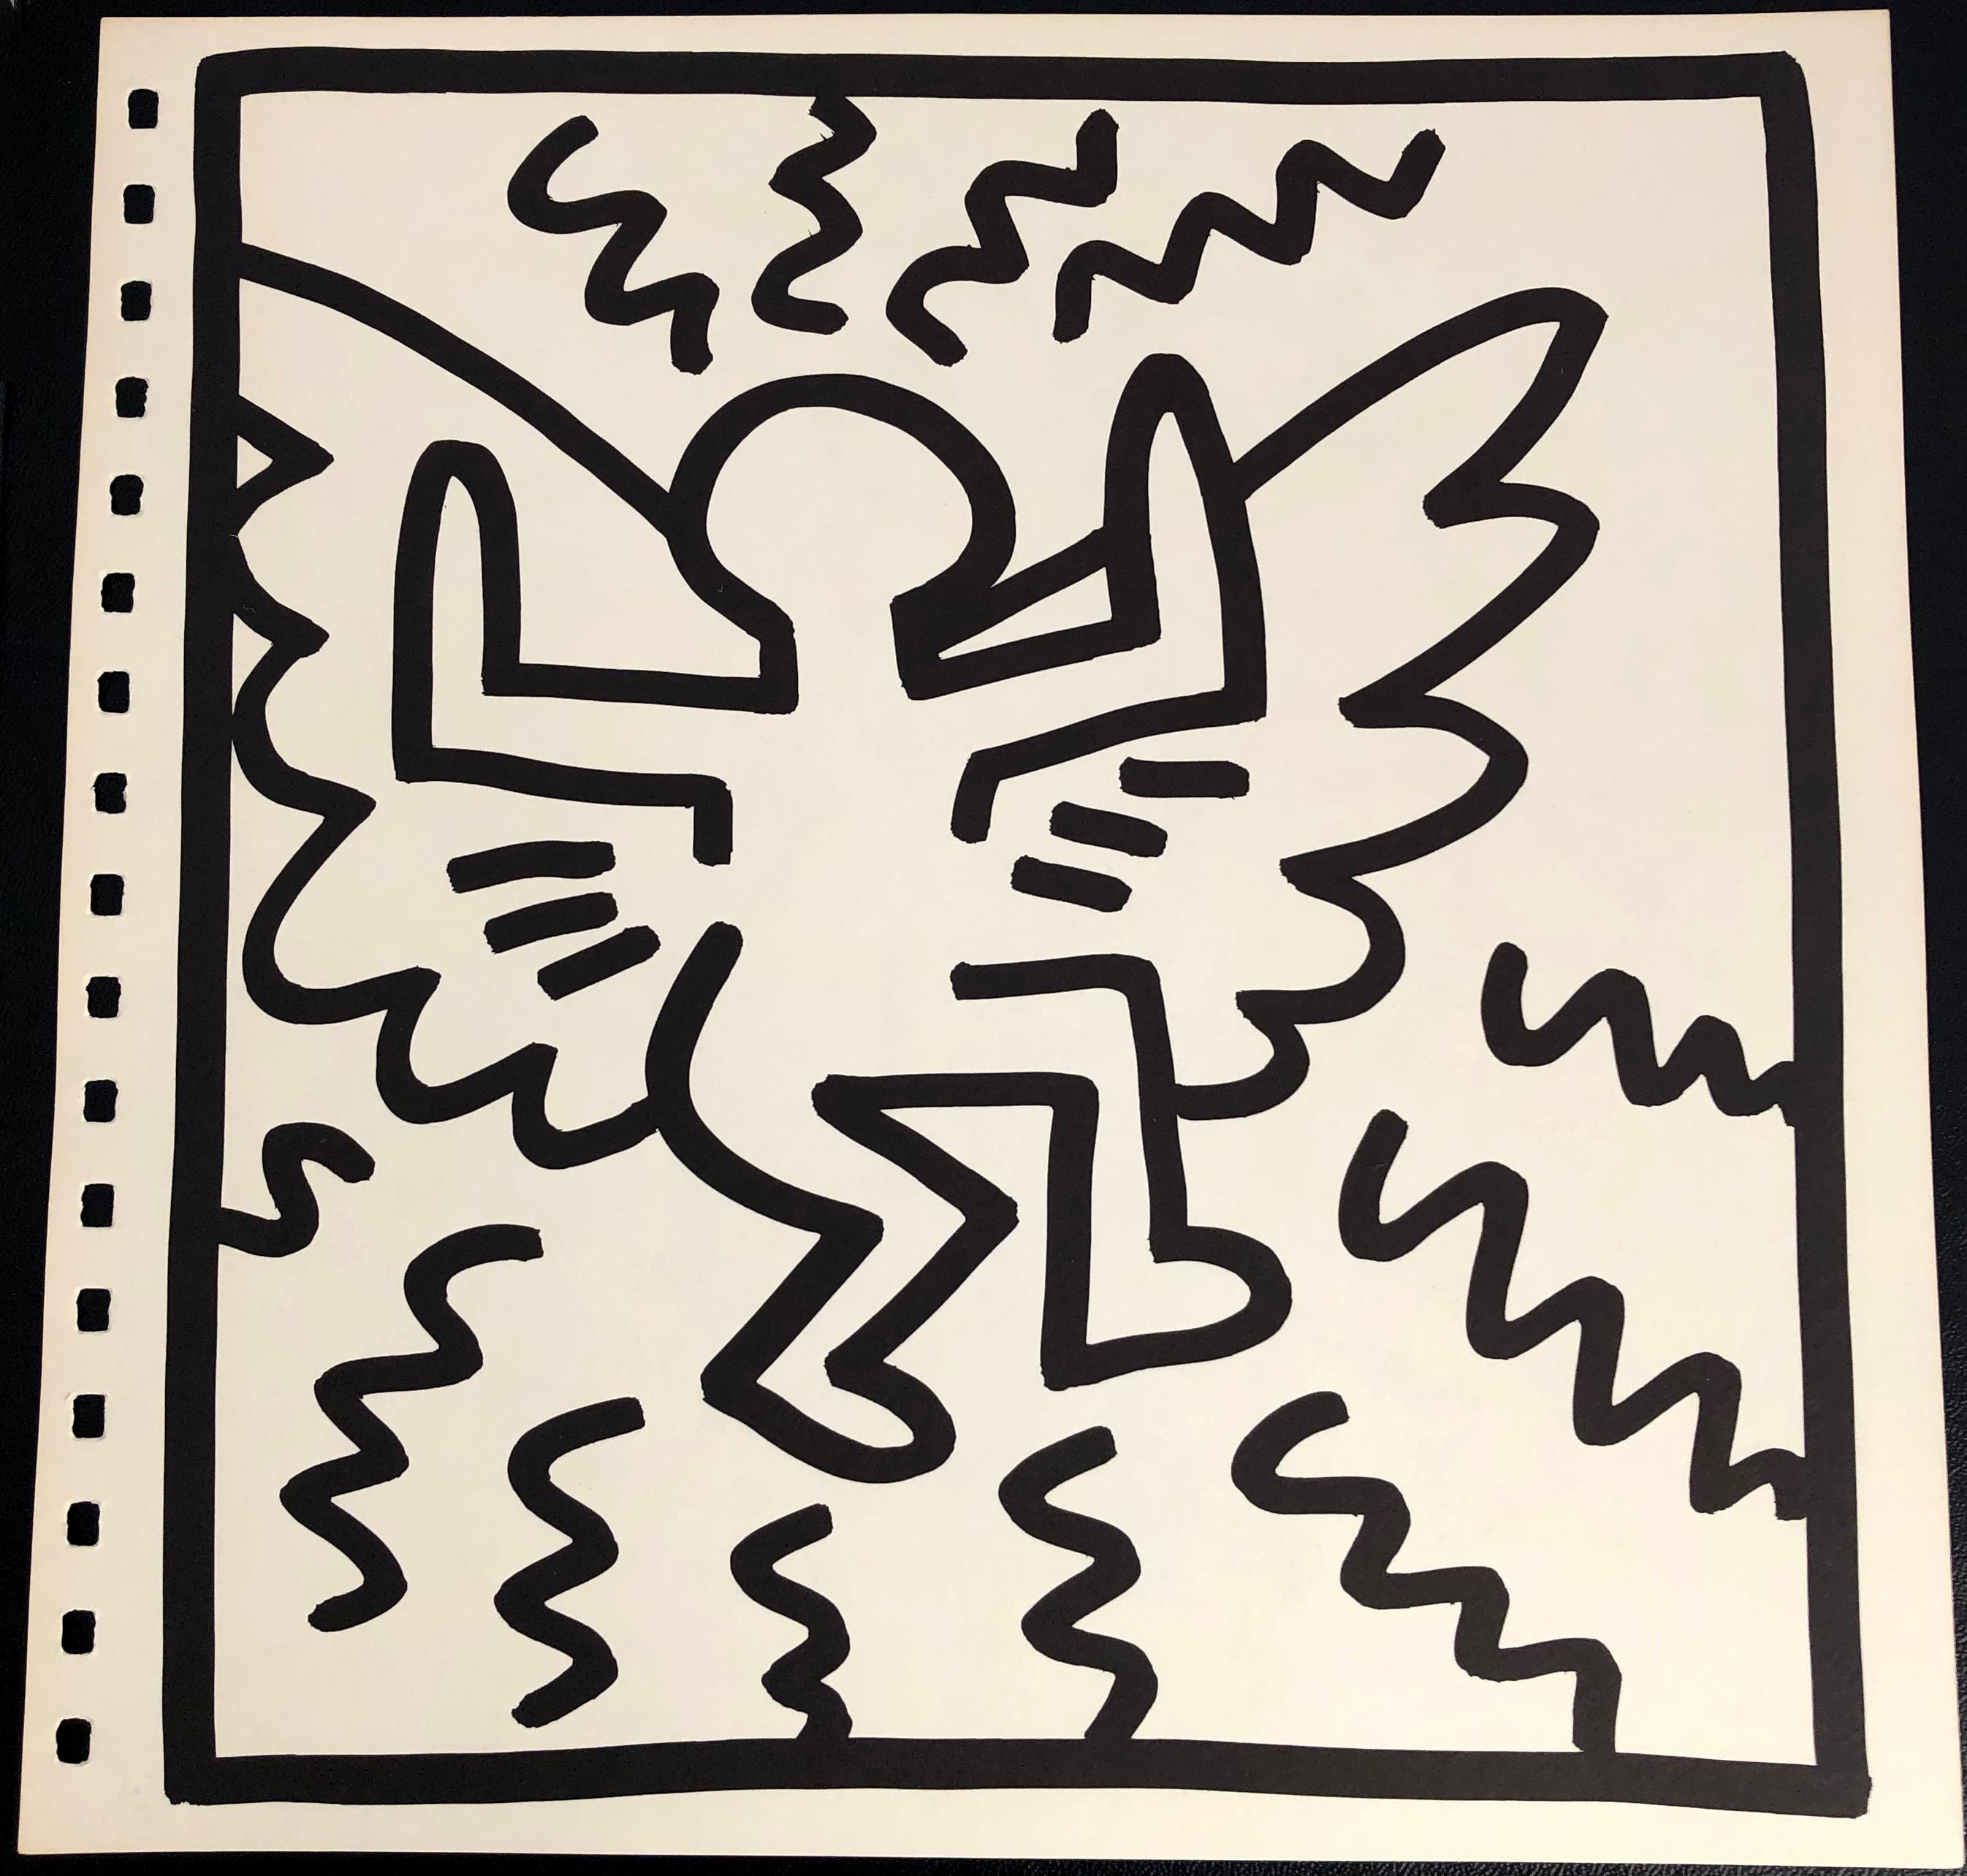 Keith Haring (untitled) Flying Angel Lithograph 1982:
Double-sided offset lithograph published by Tony Shafrazi Gallery, New York, 1982 from an edition of 2000. 

Single sheet lithograph from the seminal spiral bound, early monograph showcasing